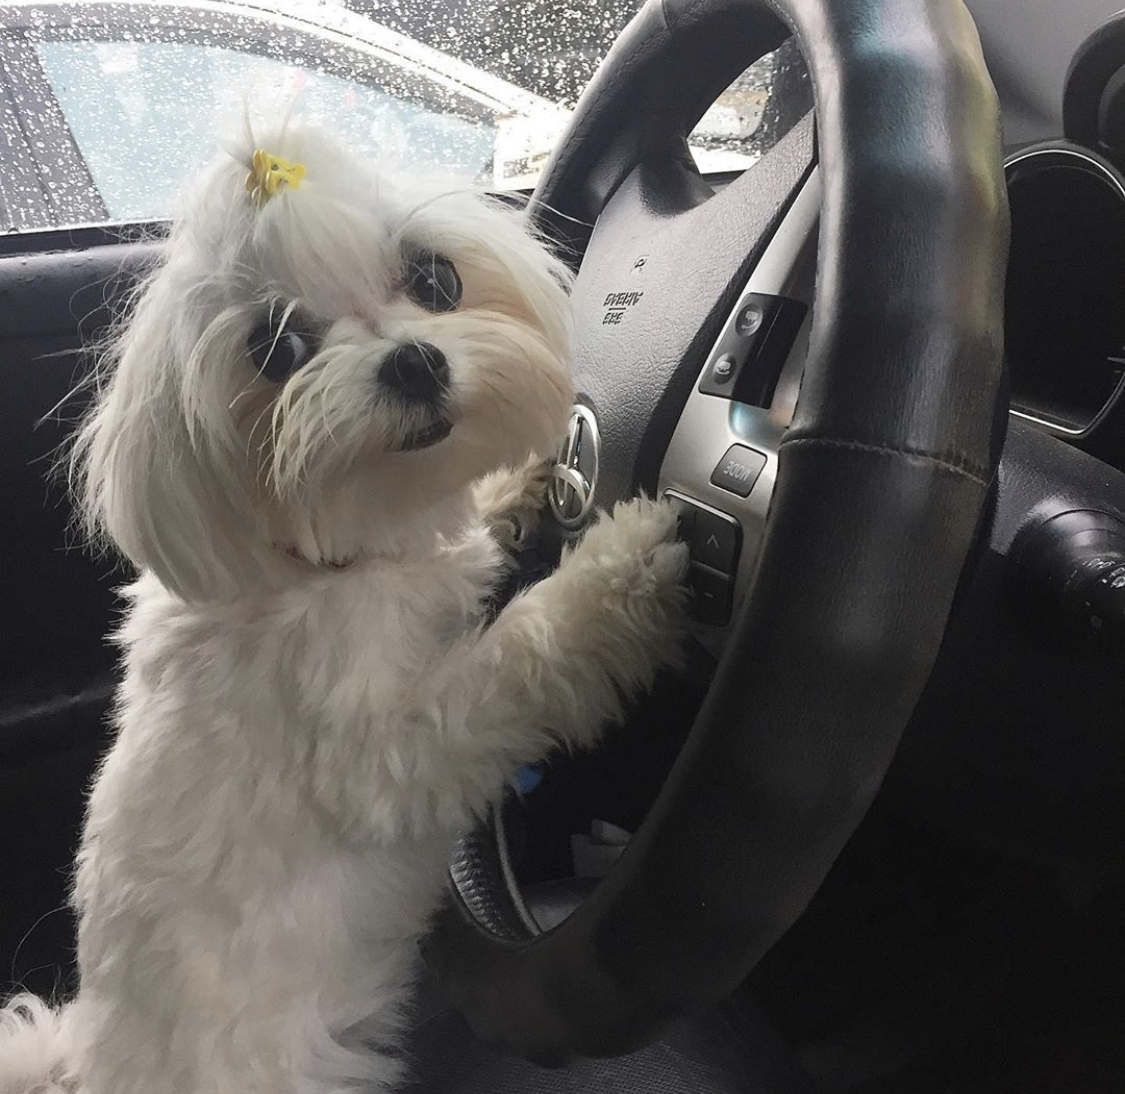 An adorable Maltese standing up leaning on the steering wheel inside the parked car